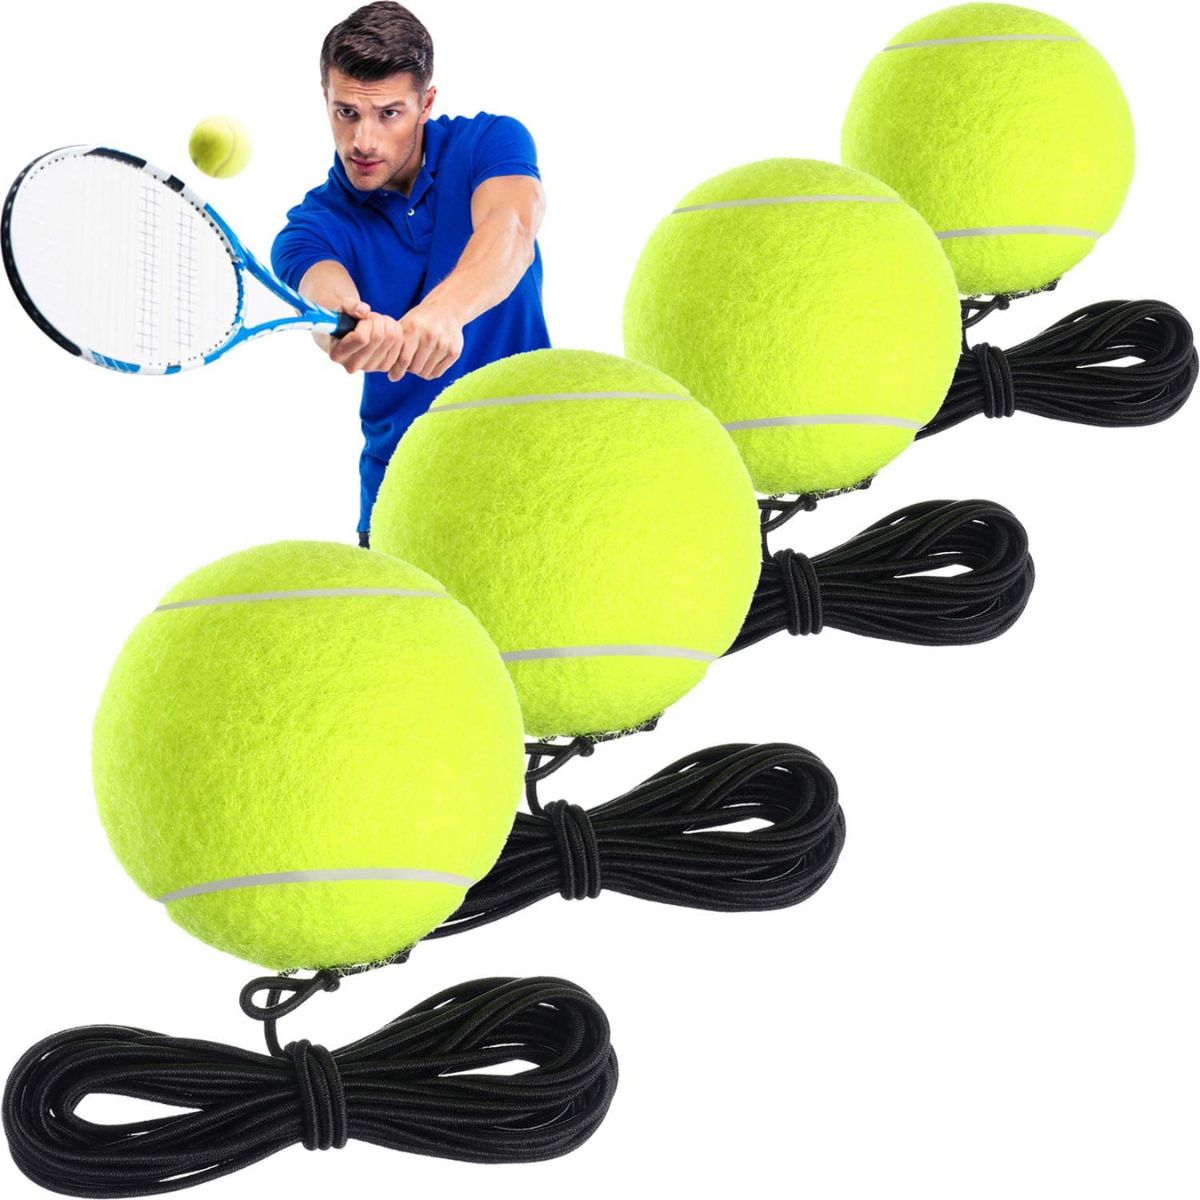 The Best Tennis Balls for Practice Options: Tennis Training Ball with String